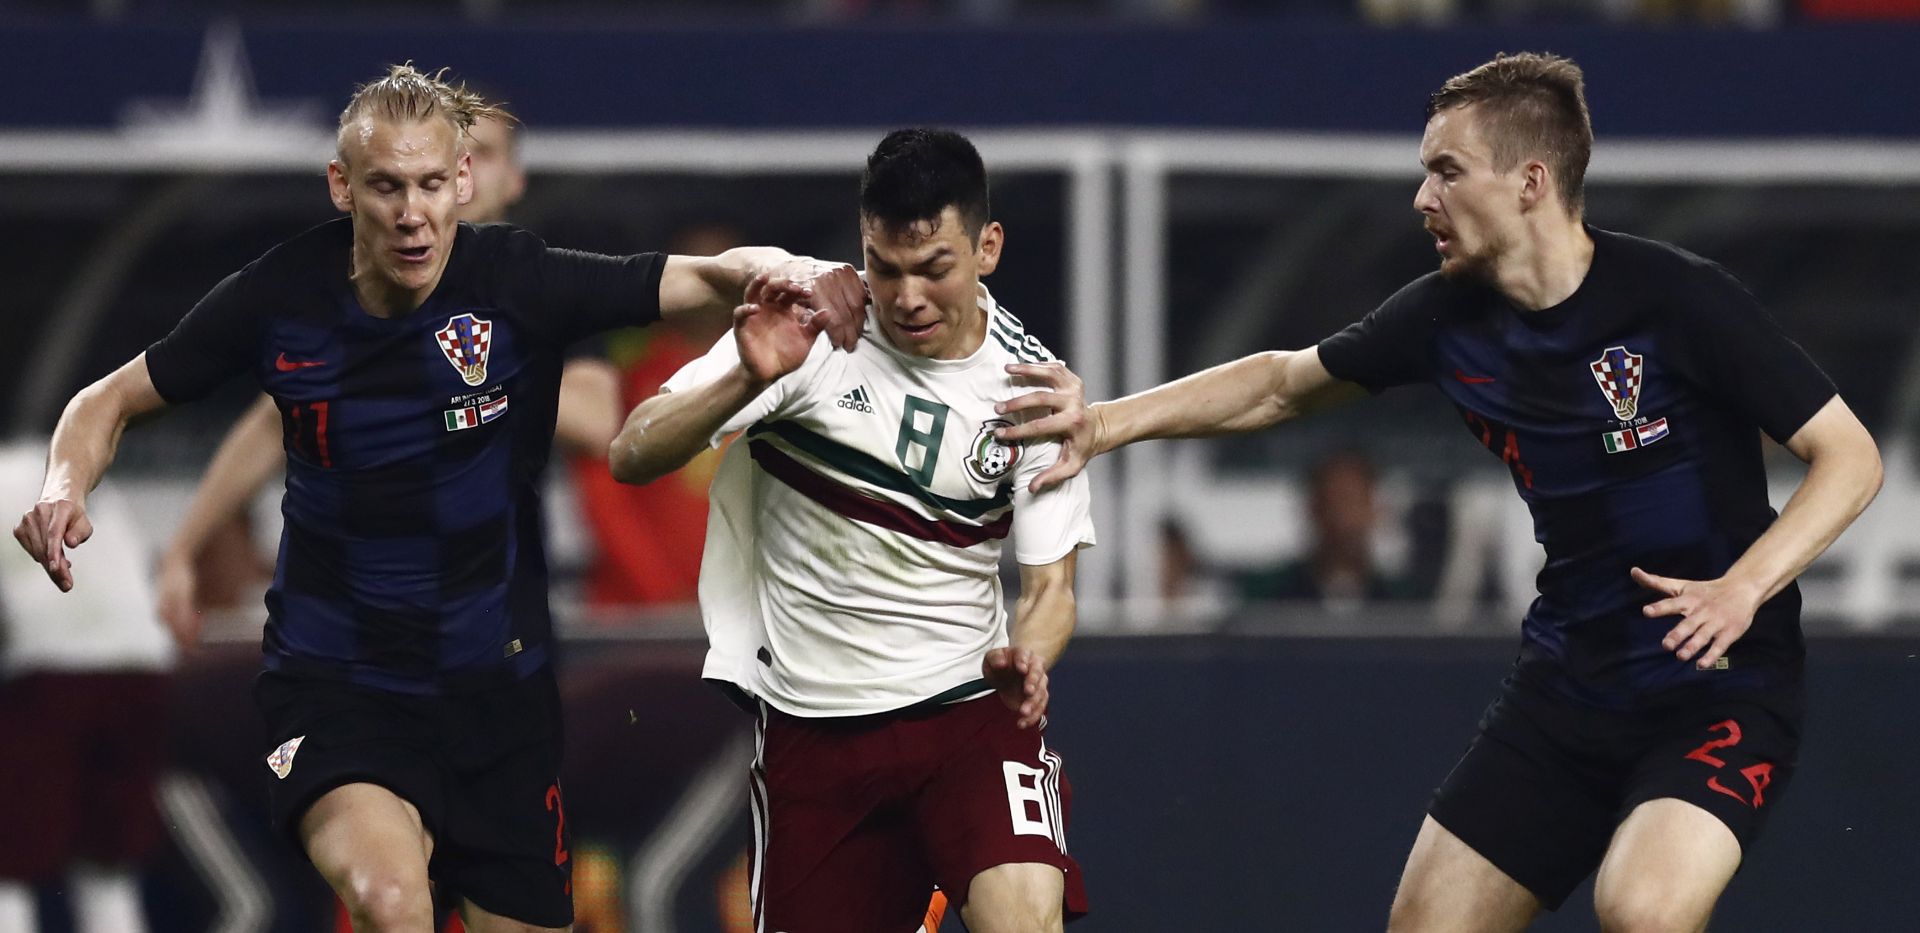 epa06633467 Hirving Lozano (C) of Mexico goes for the ball against Filip Bradaric (R) and Domagoj Vida (L) of Croatia in the second half of the friendly soccer match between Mexico and Croatia in Arlington, Texas, USA, 27 March 2018.  EPA/LARRY W. SMITH